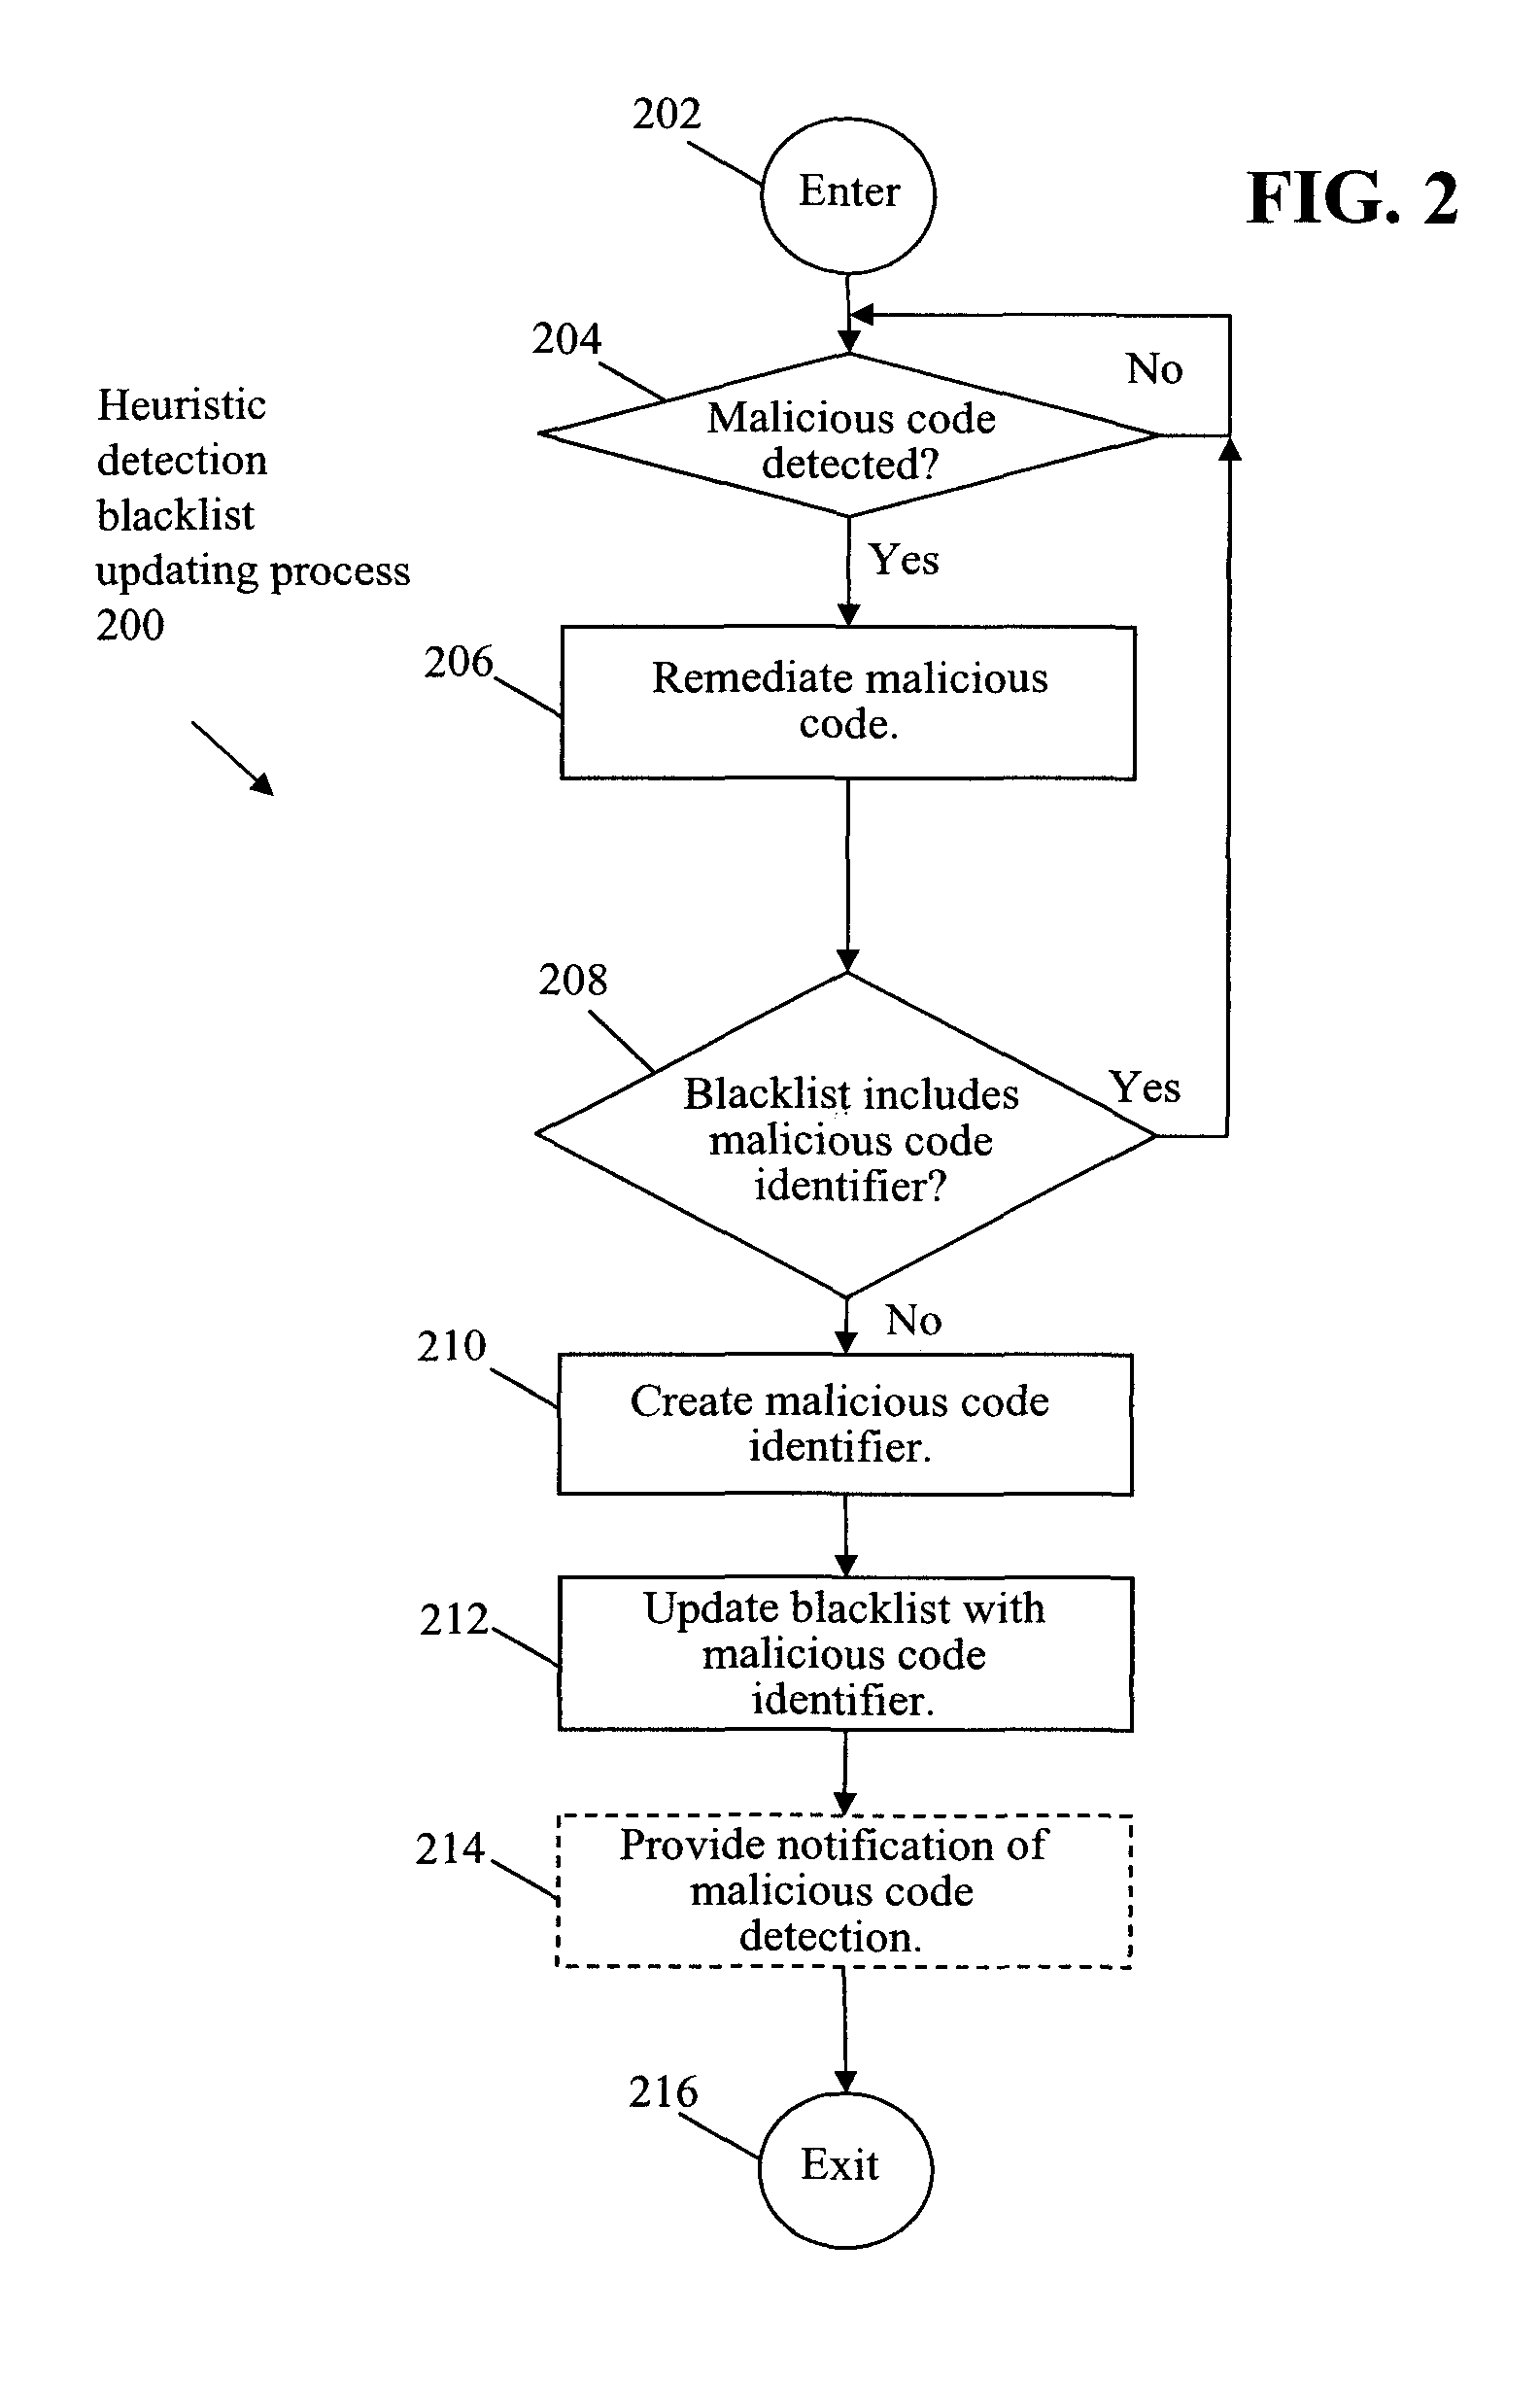 Heuristic detection malicious code blacklist updating and protection system and method